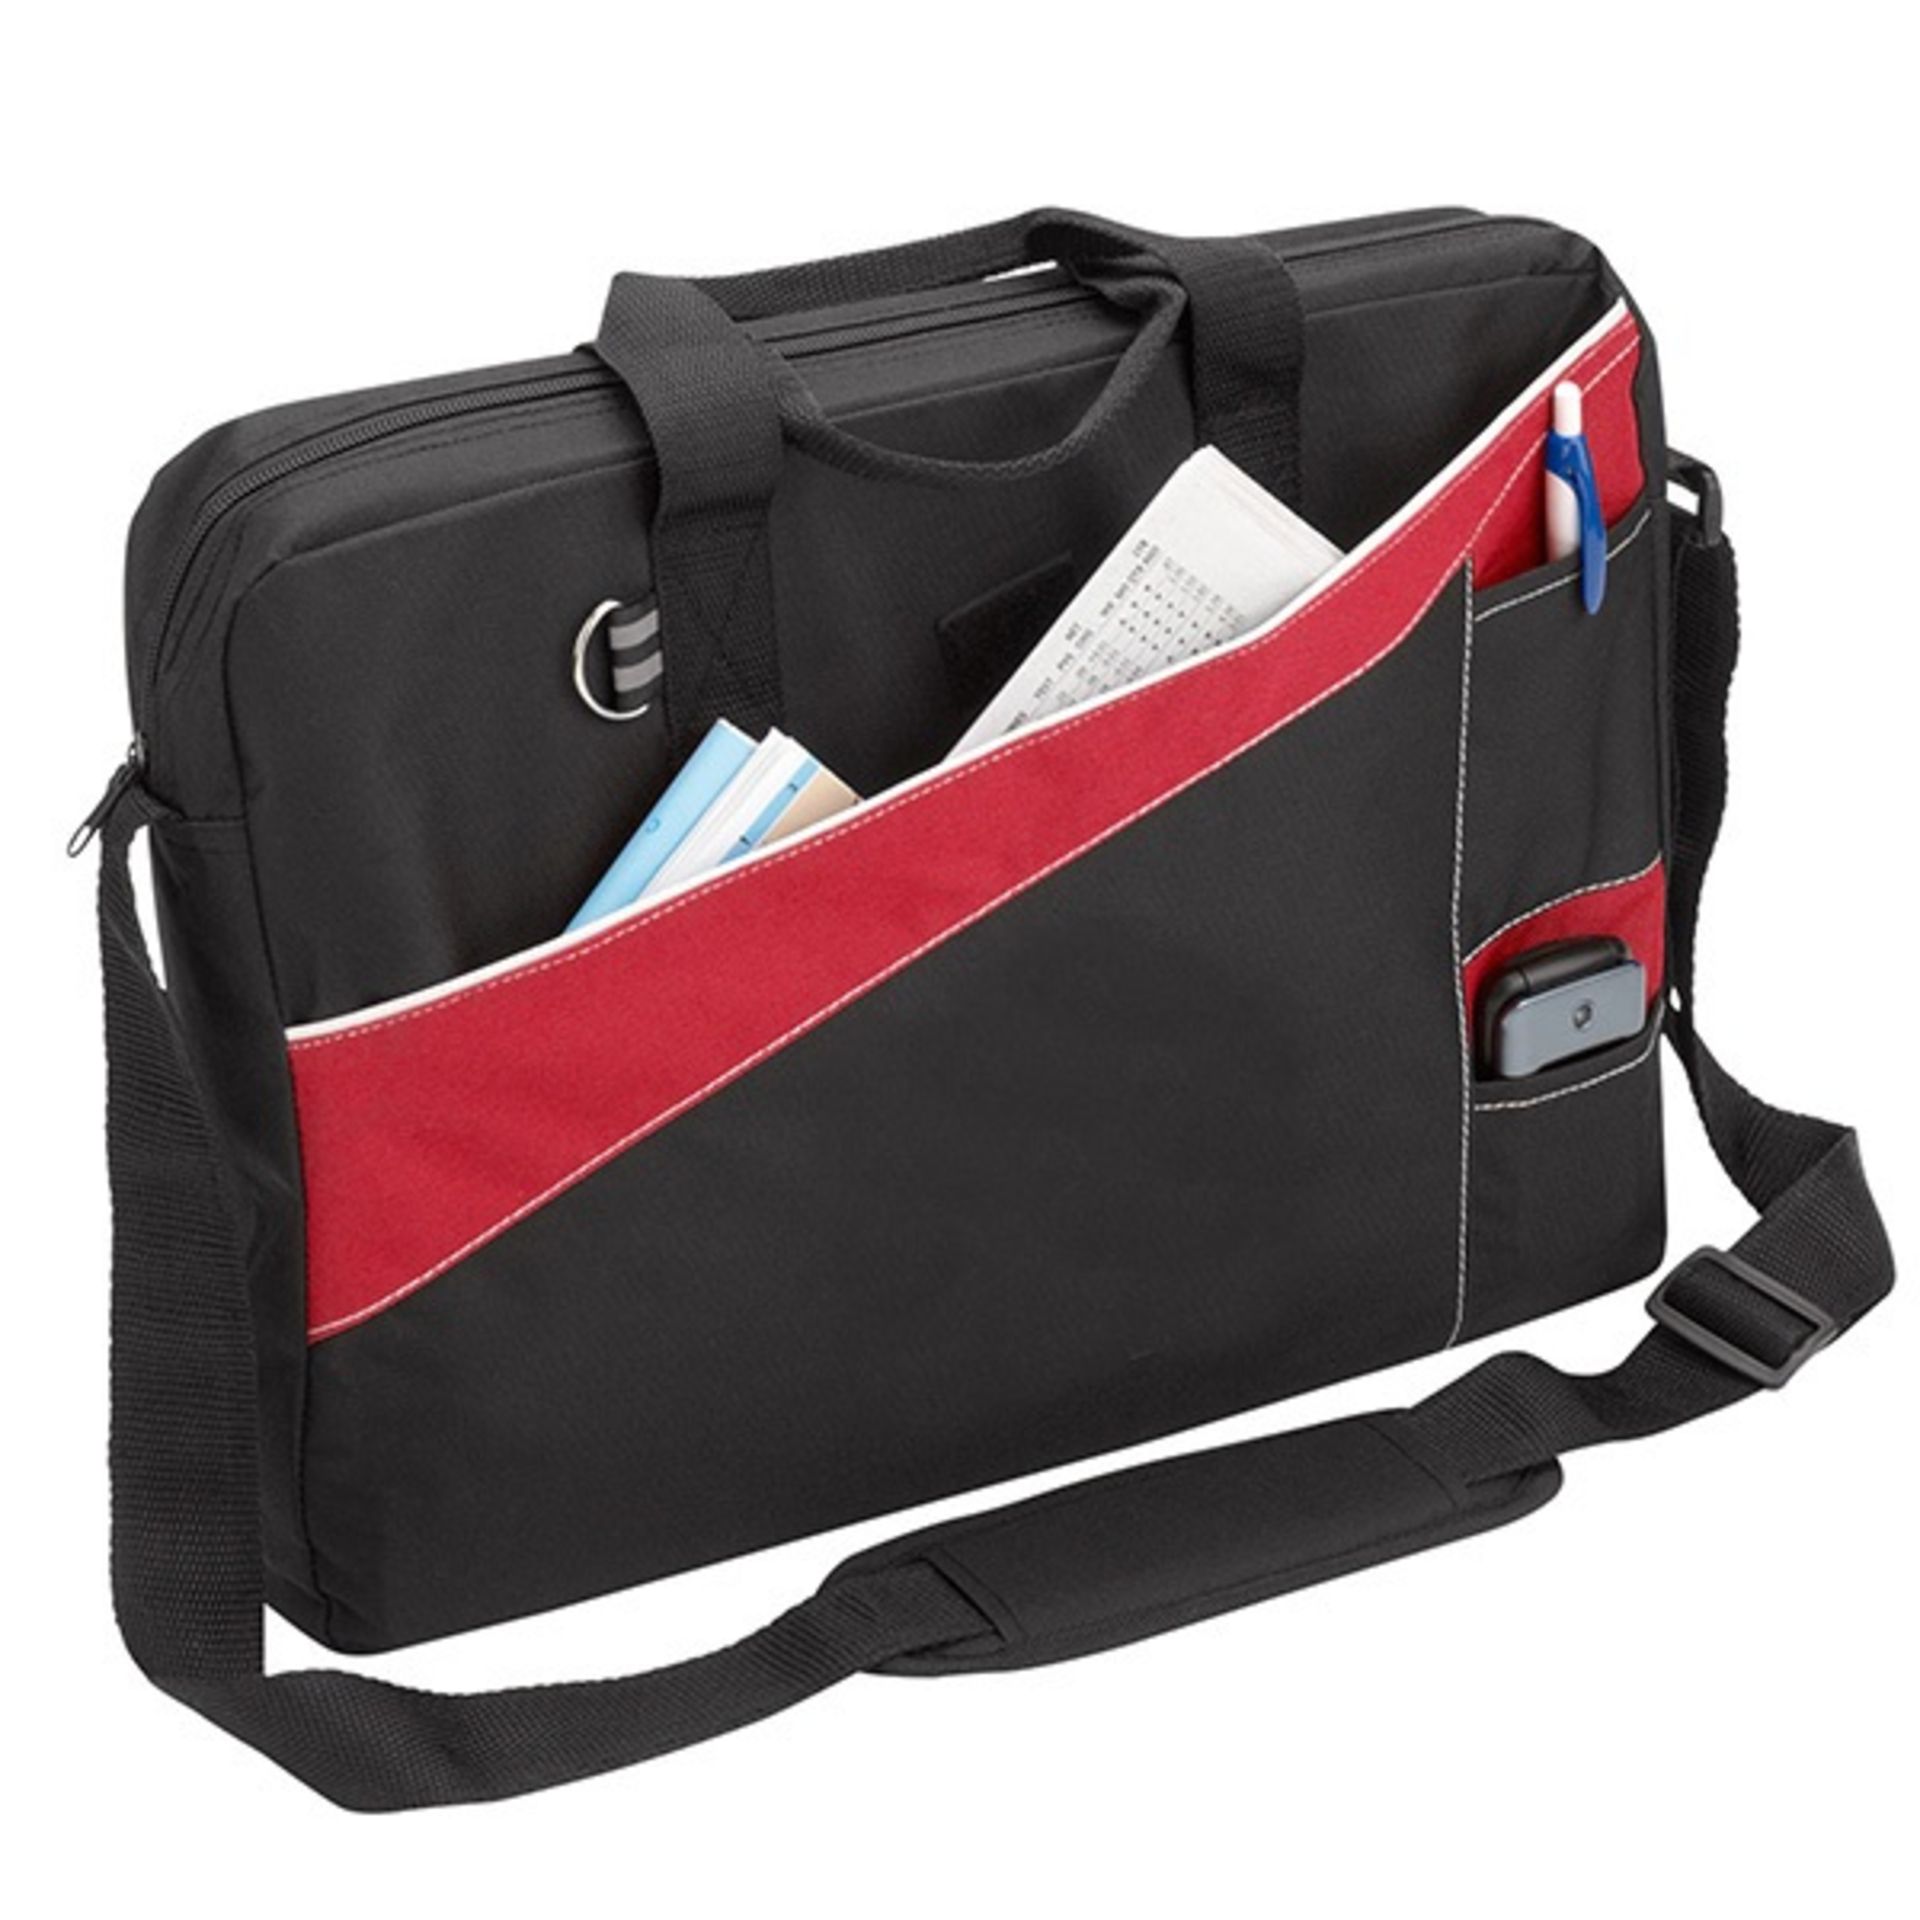 48 x Geometric Laptop Bags With Should Straps and Side Pockets - Colour Black & Red - Brand New - Image 2 of 2